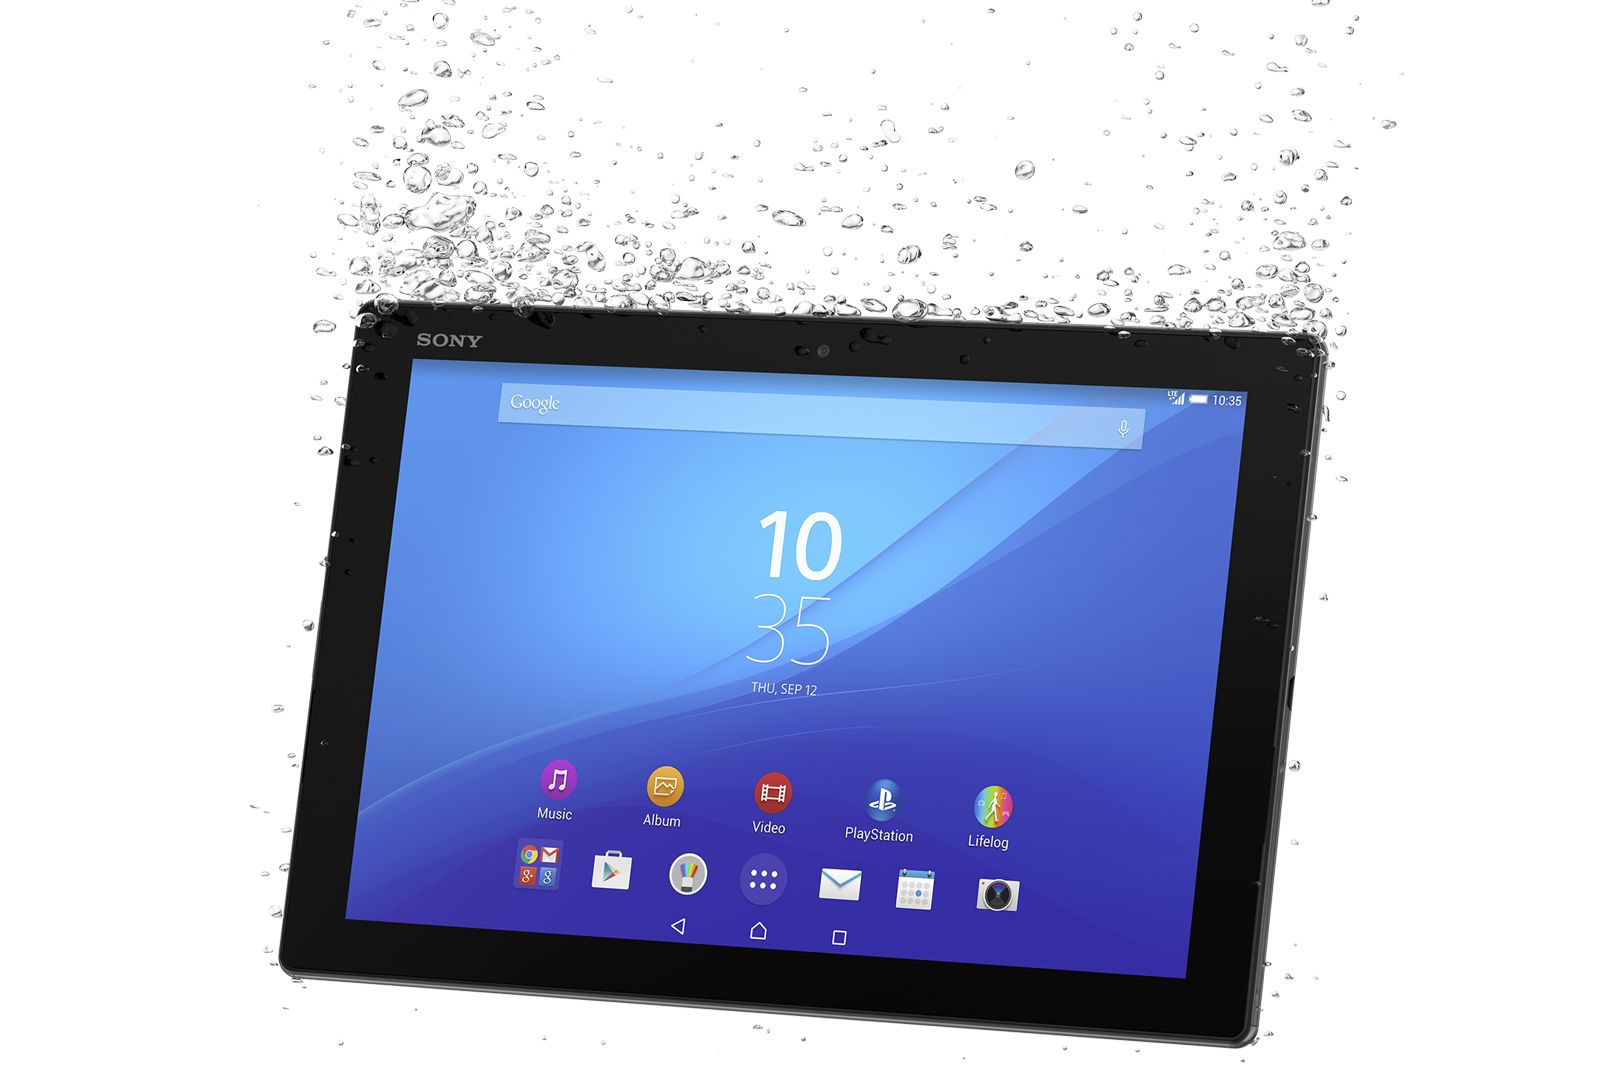 no sony xperia z4 but there is an xperia z4 tablet that wants to replace your laptop image 1